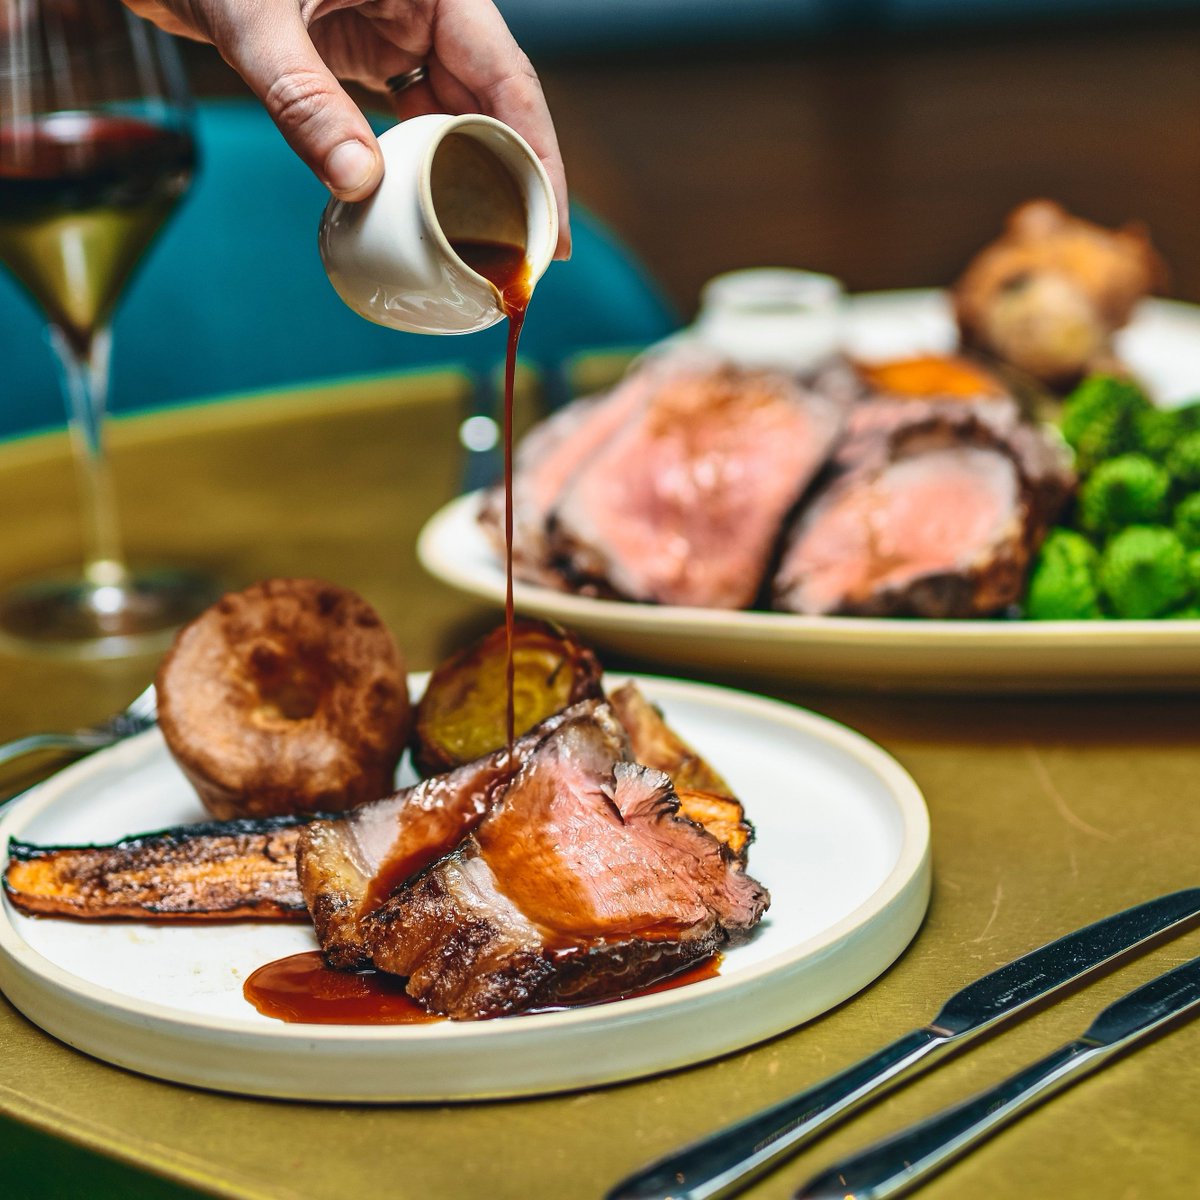 If you're dining with us this Sunday our chefs have crafted a special limited menu for the occasion for 49.50pp. Check out the delicious menu here: rotundabarandrestaurant.co.uk/easter-sunday/